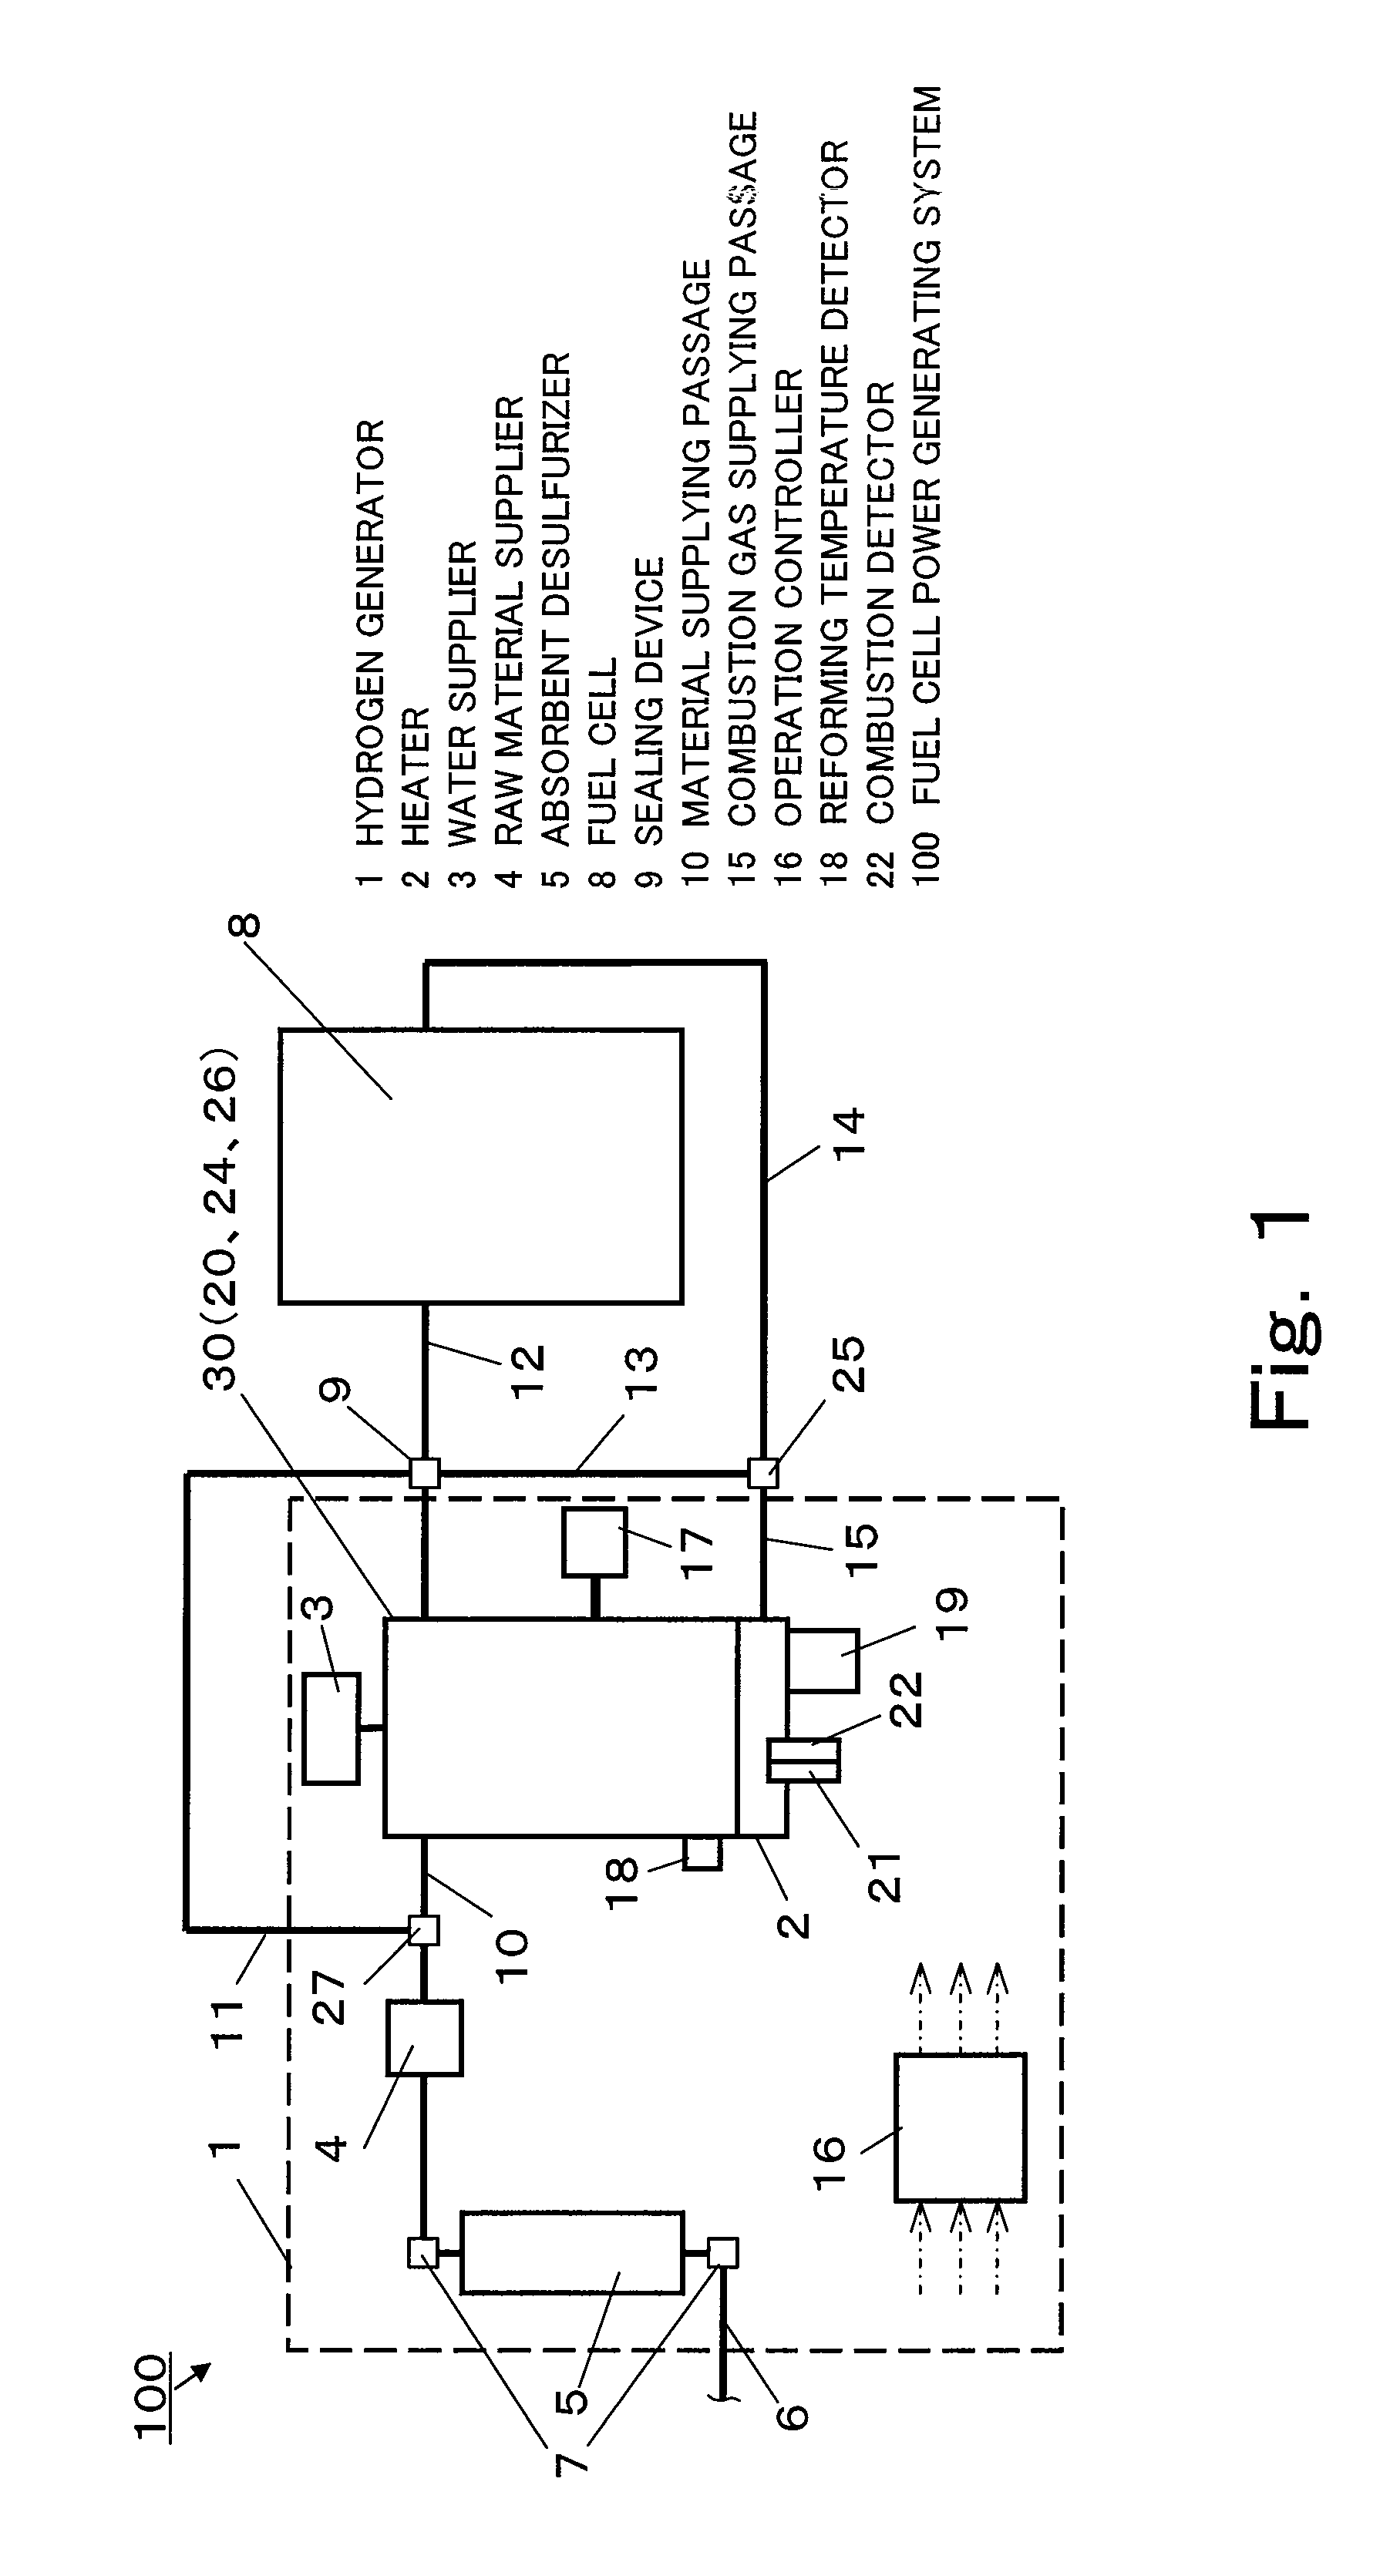 Method for stopping a hydrogen generator by controlling water supply to a reformer